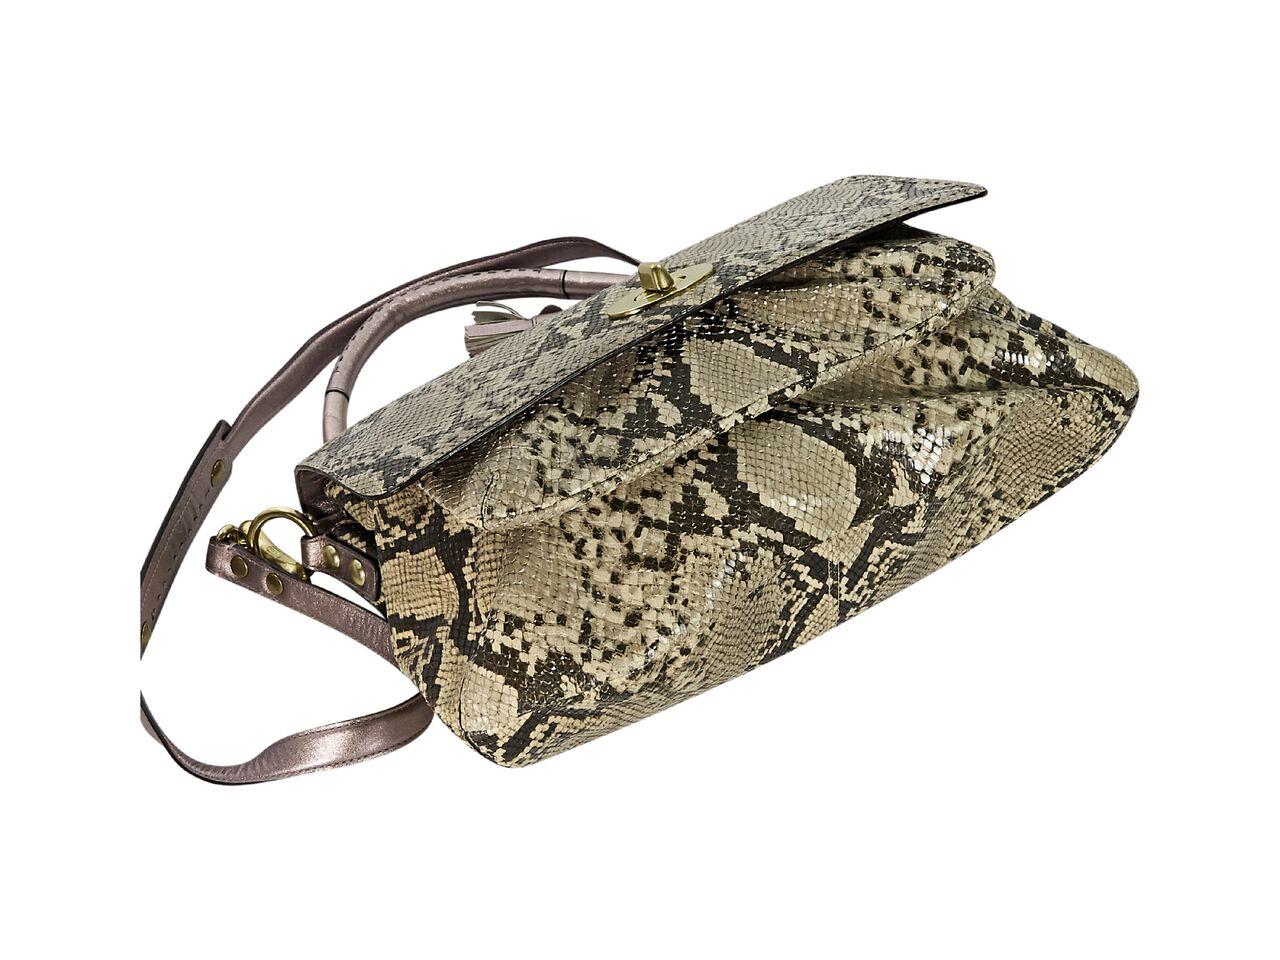 Product details:  Beige python shoulder bag by Coach.  Trimmed with metallic leather.  Top carry handle.  Detachable shoulder strap.  Front flap with twist-lock closure over front exterior pocket.  Lined interior with center zip compartment and